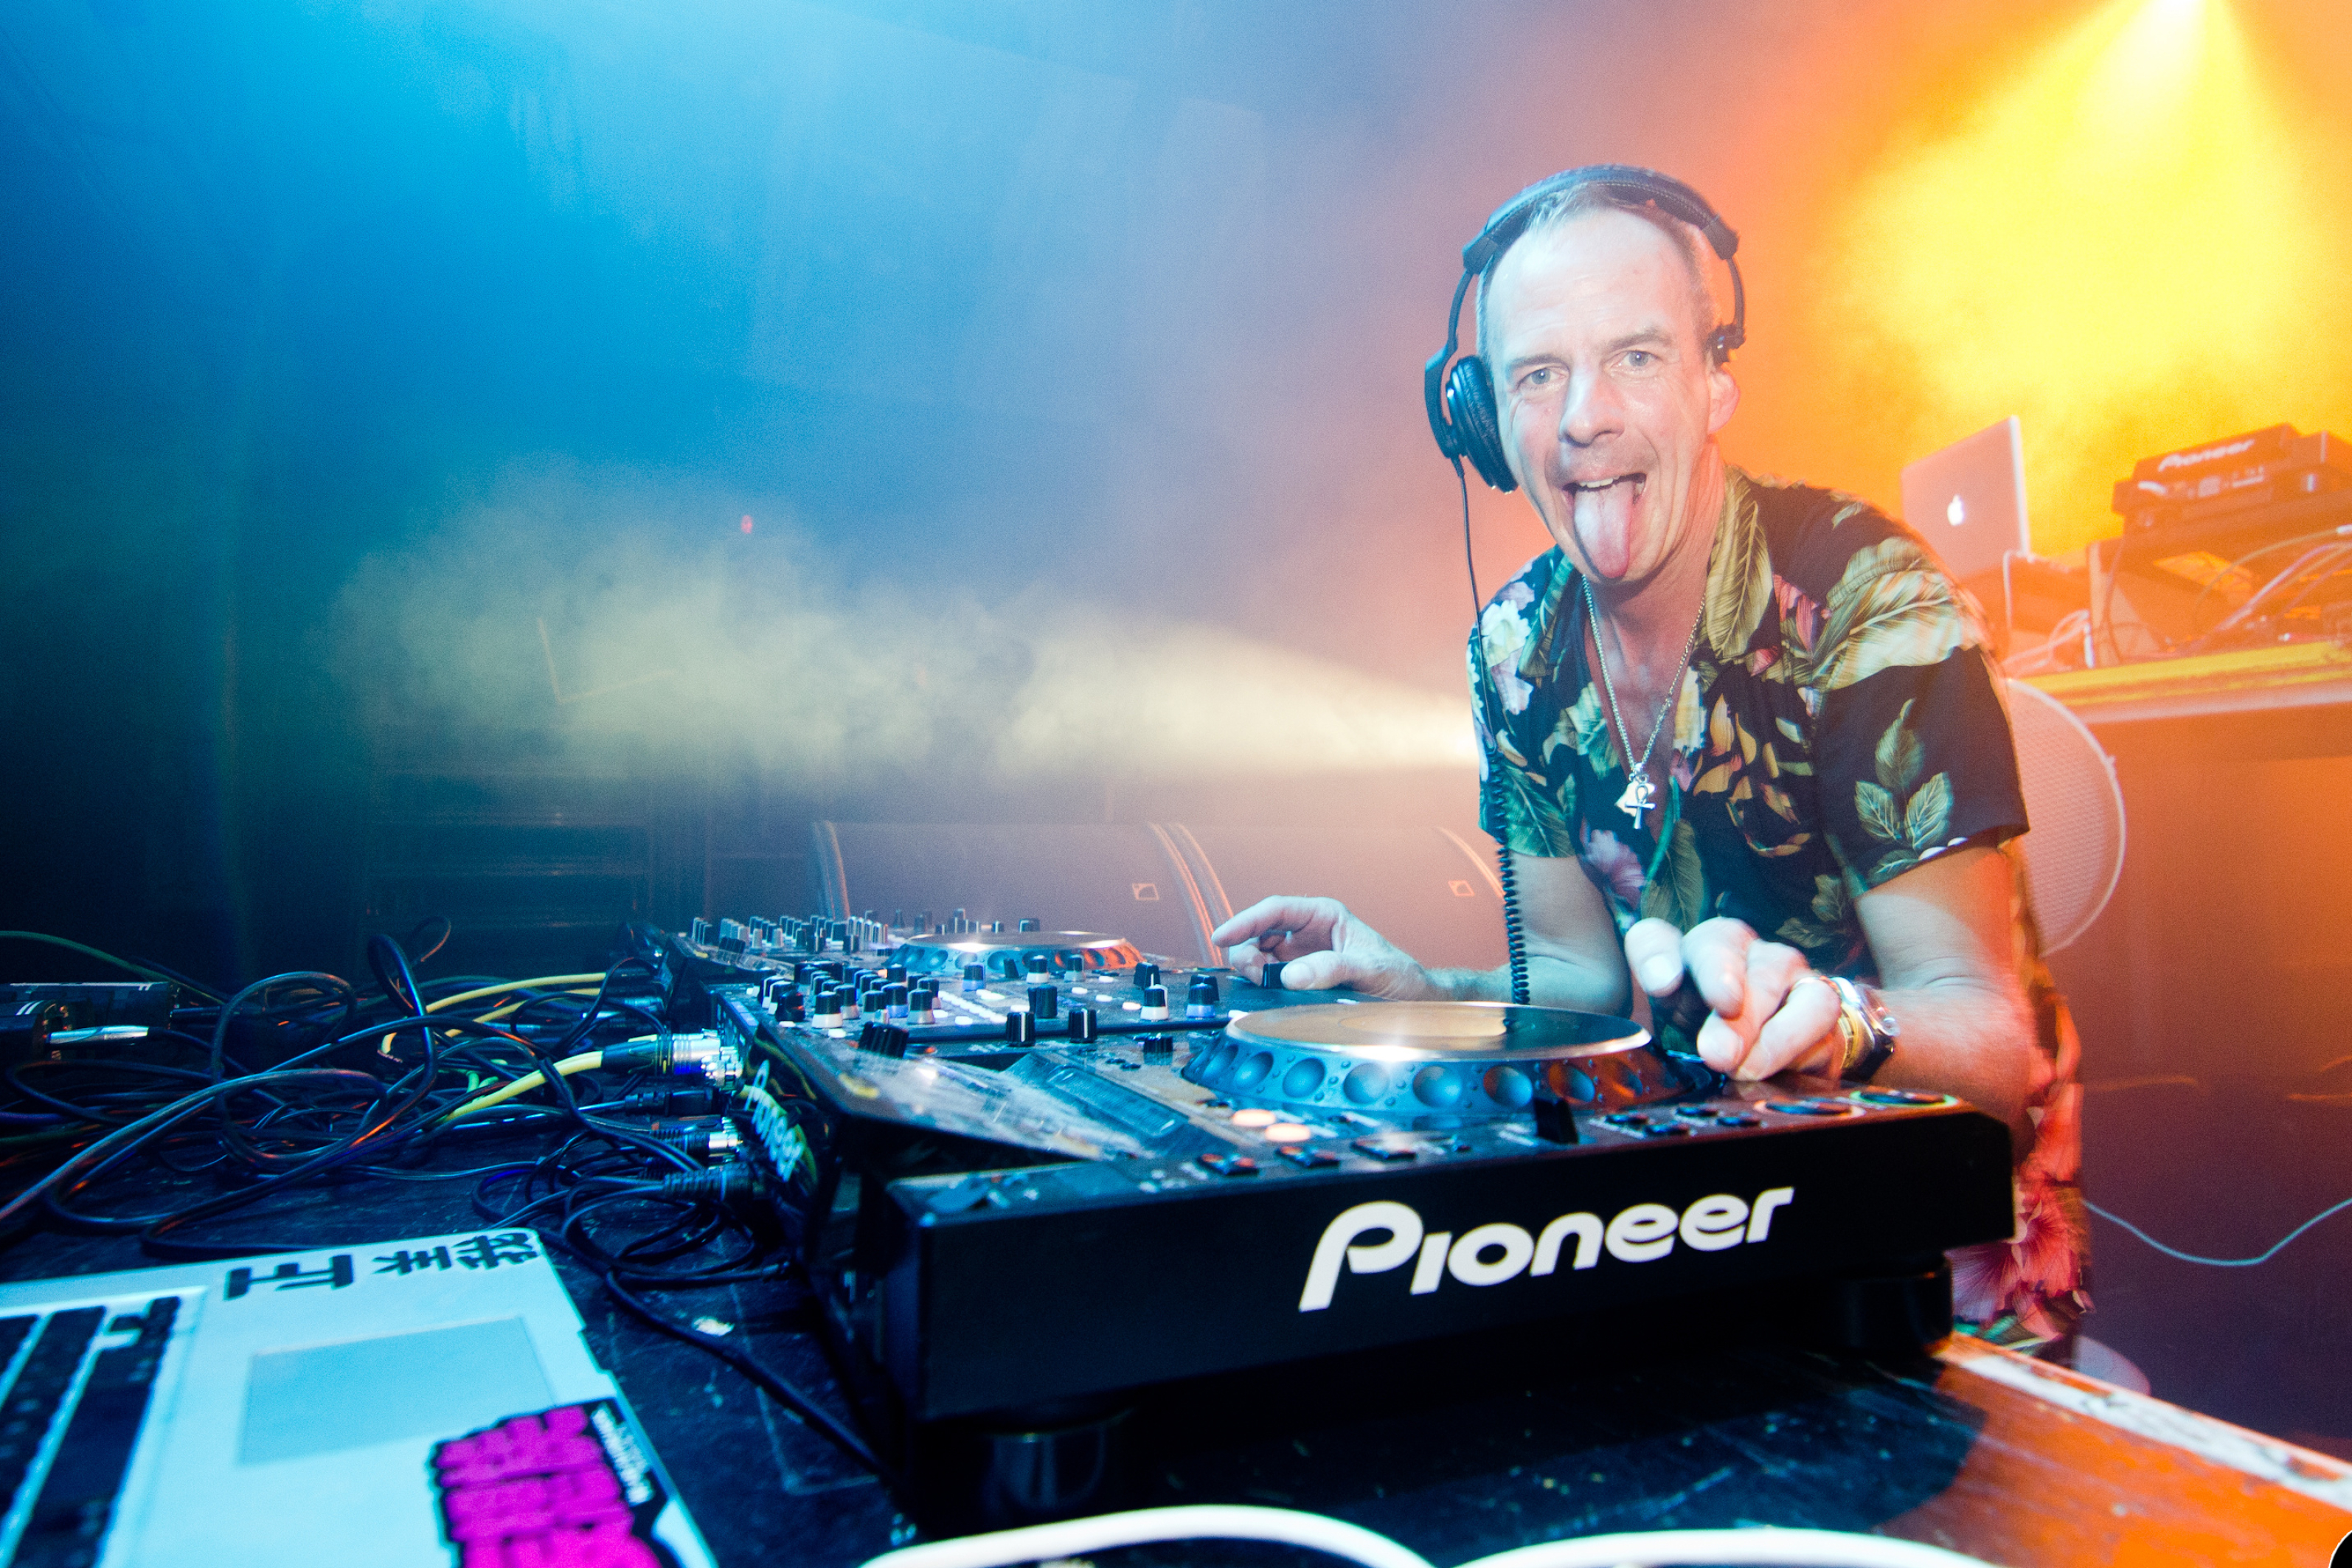 Fatboy Slim, HD wallpapers, High-quality images, Graphic artwork, 3190x2130 HD Desktop